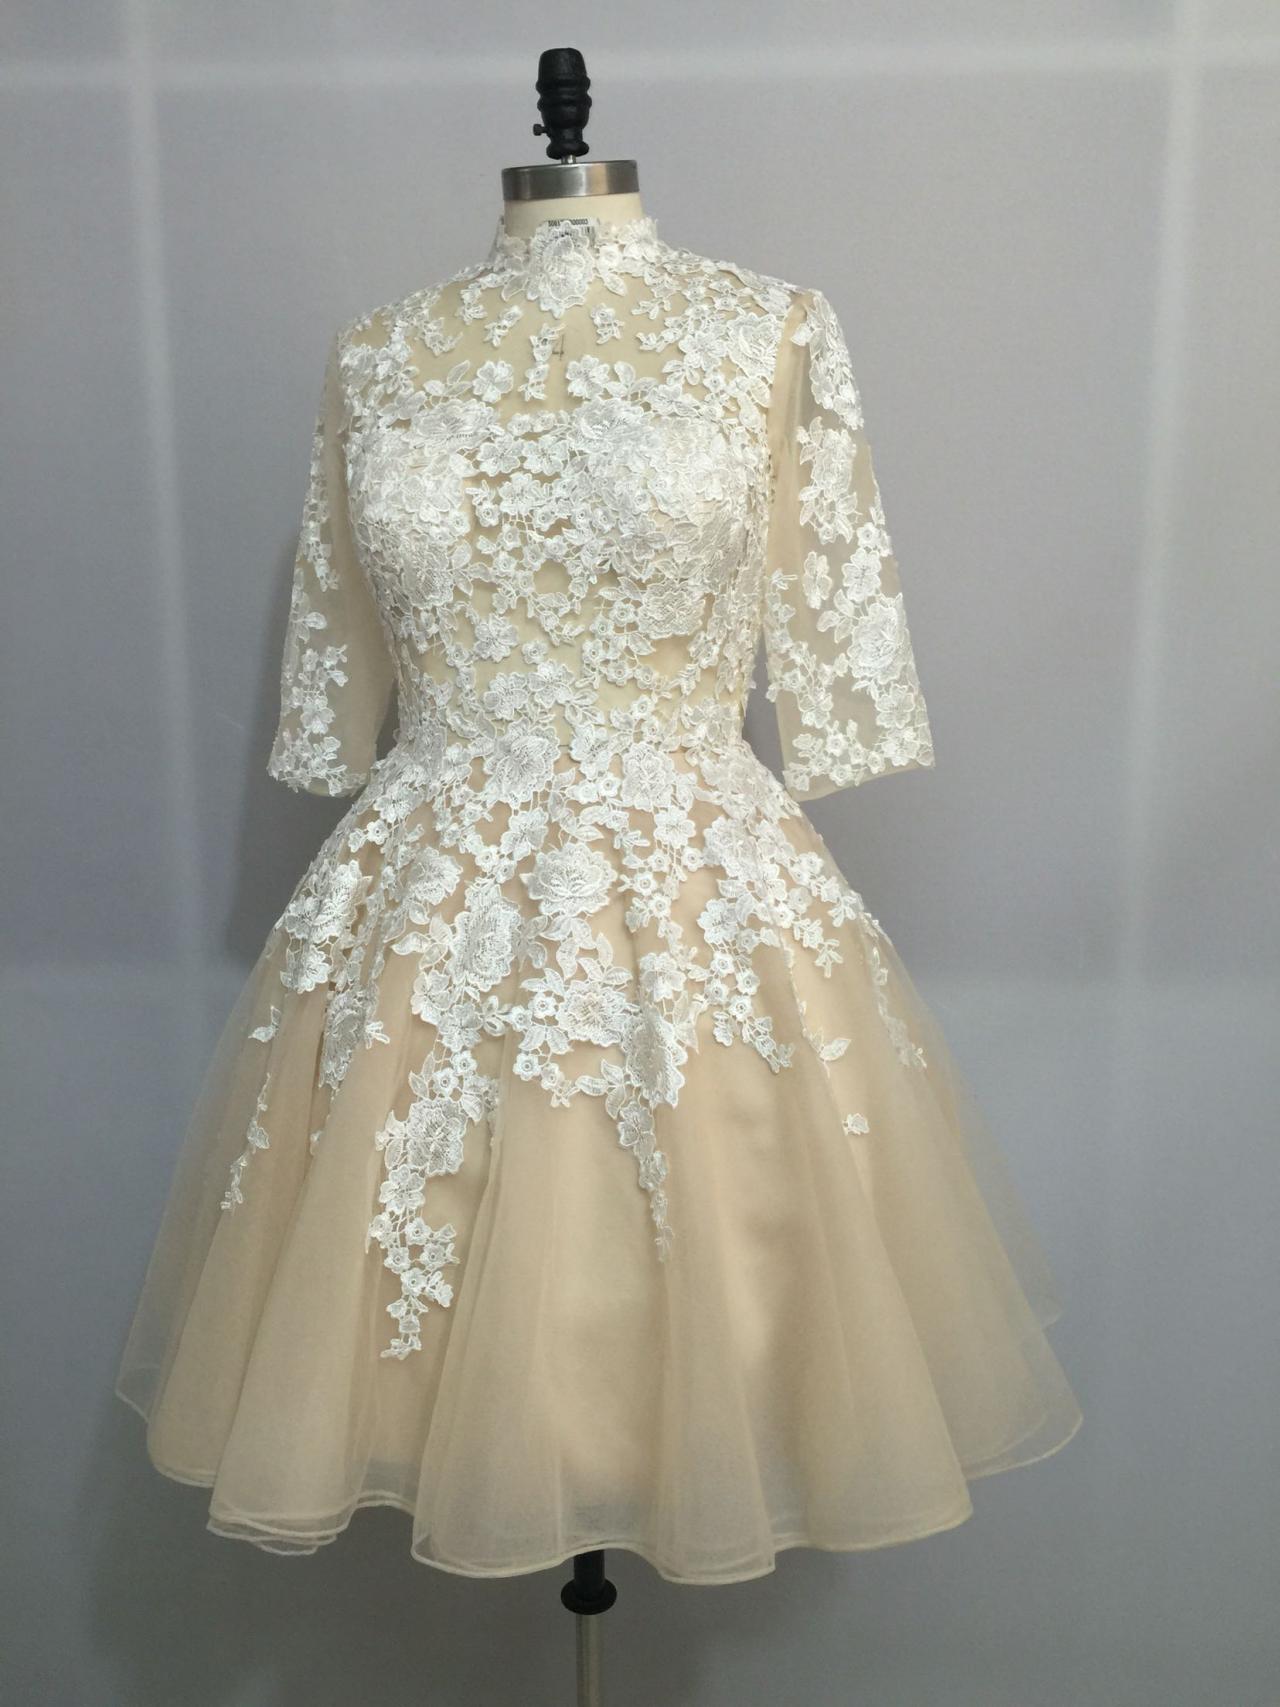 Handmade Lace Applique with Tulle Short Formal Dresses, Lovely Party Dresses, Sweet 16 Dresses